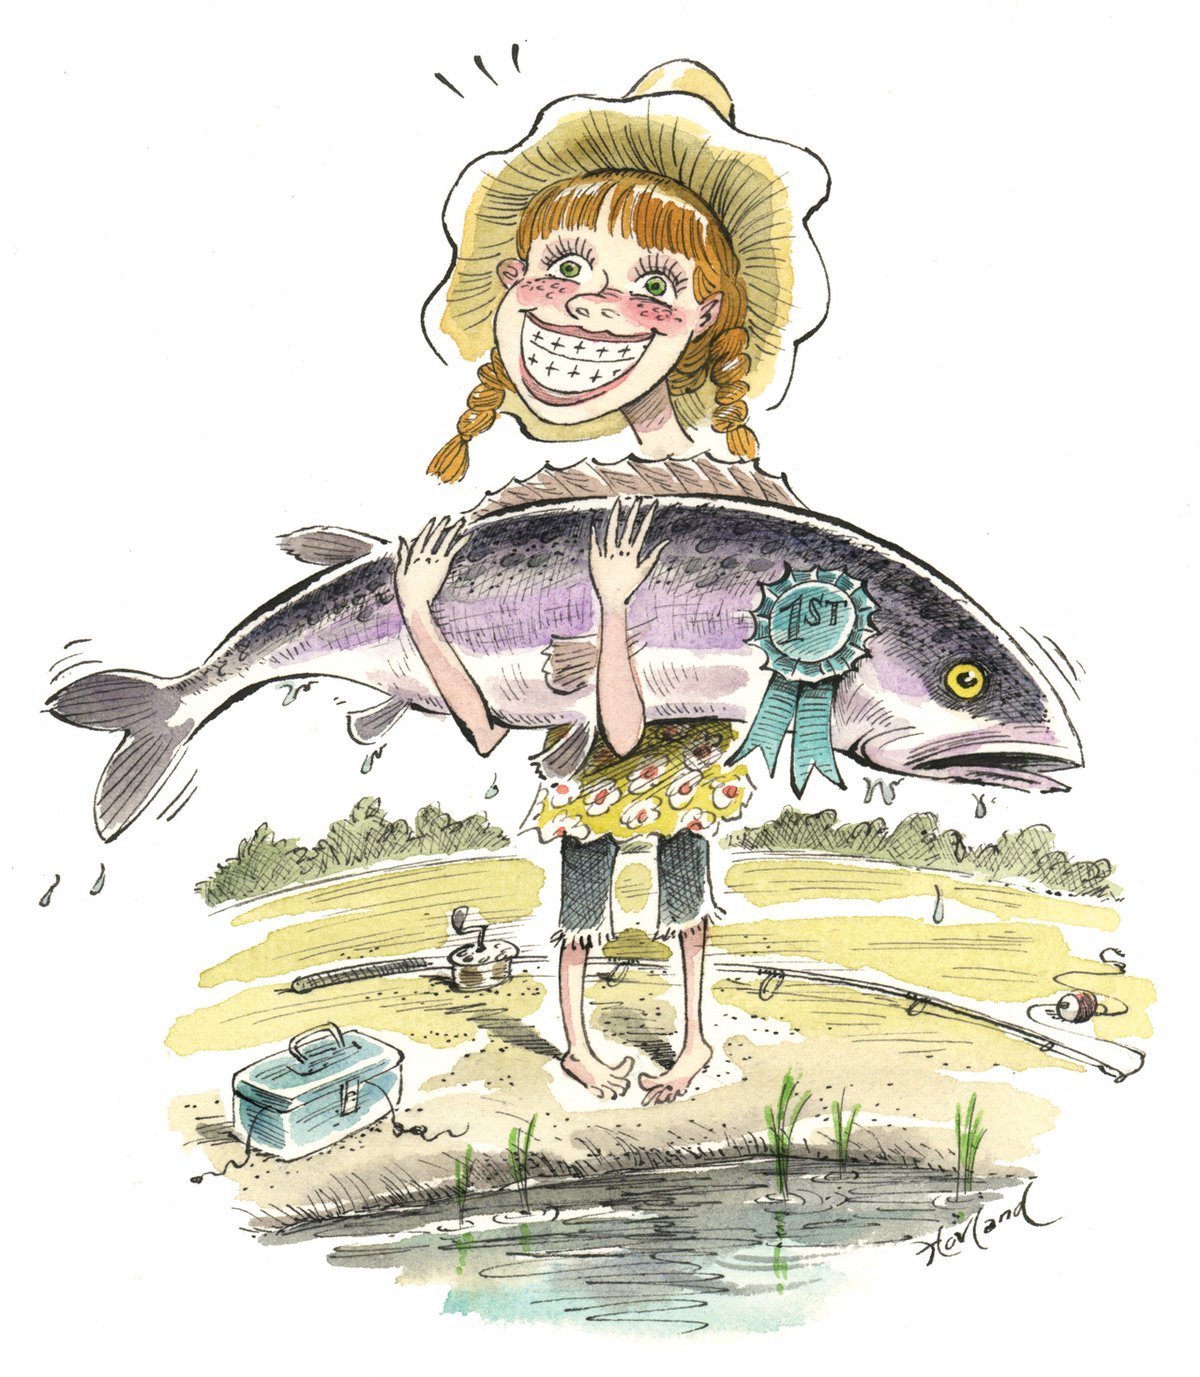 A Fine Kettle of Fish - VirginiaLiving.com